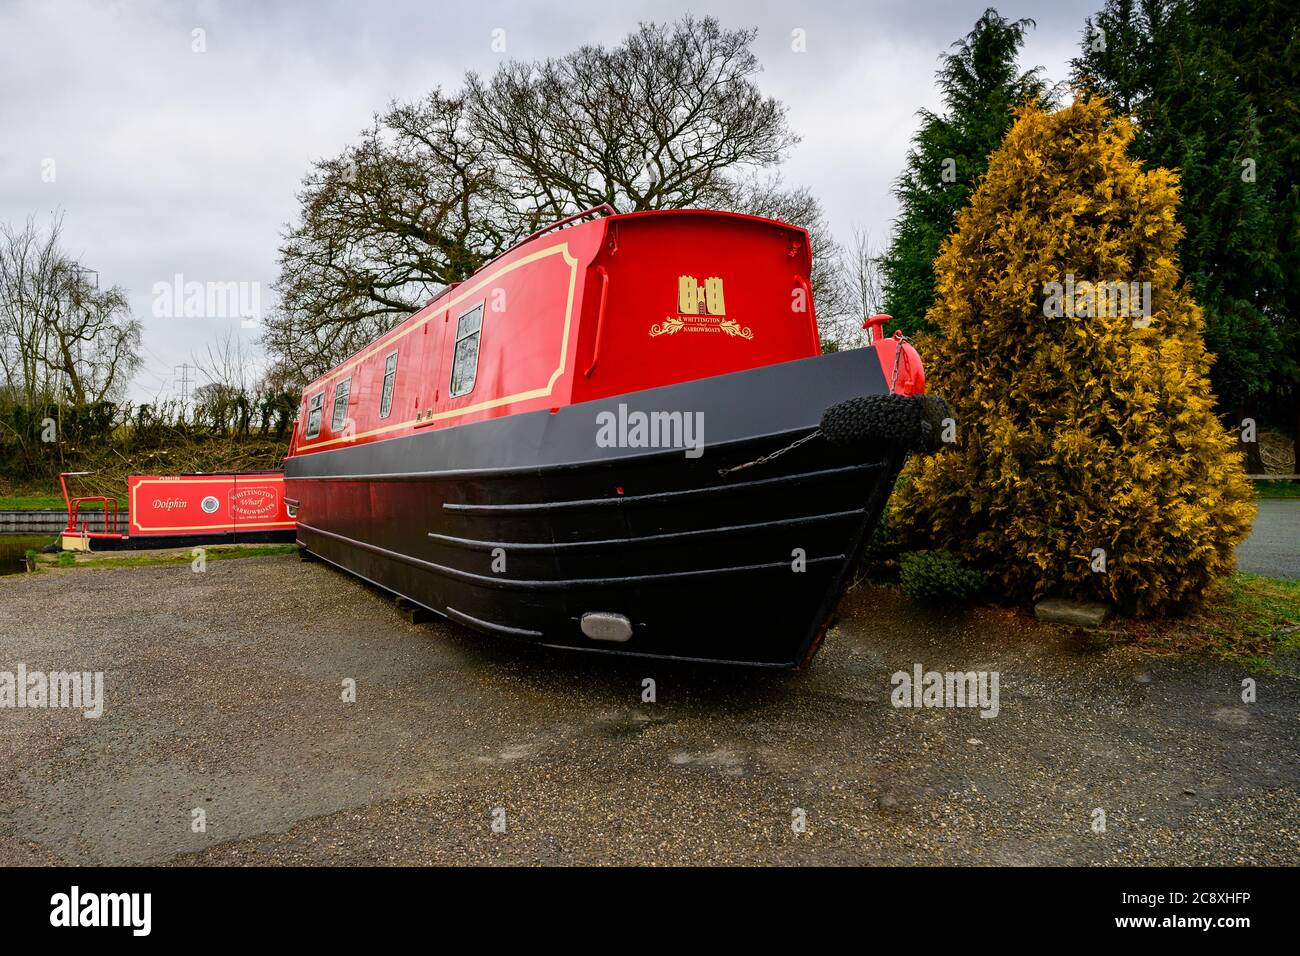 Newly painted hire boat ready for use on a canal in Shropshire UK. Stock Photo